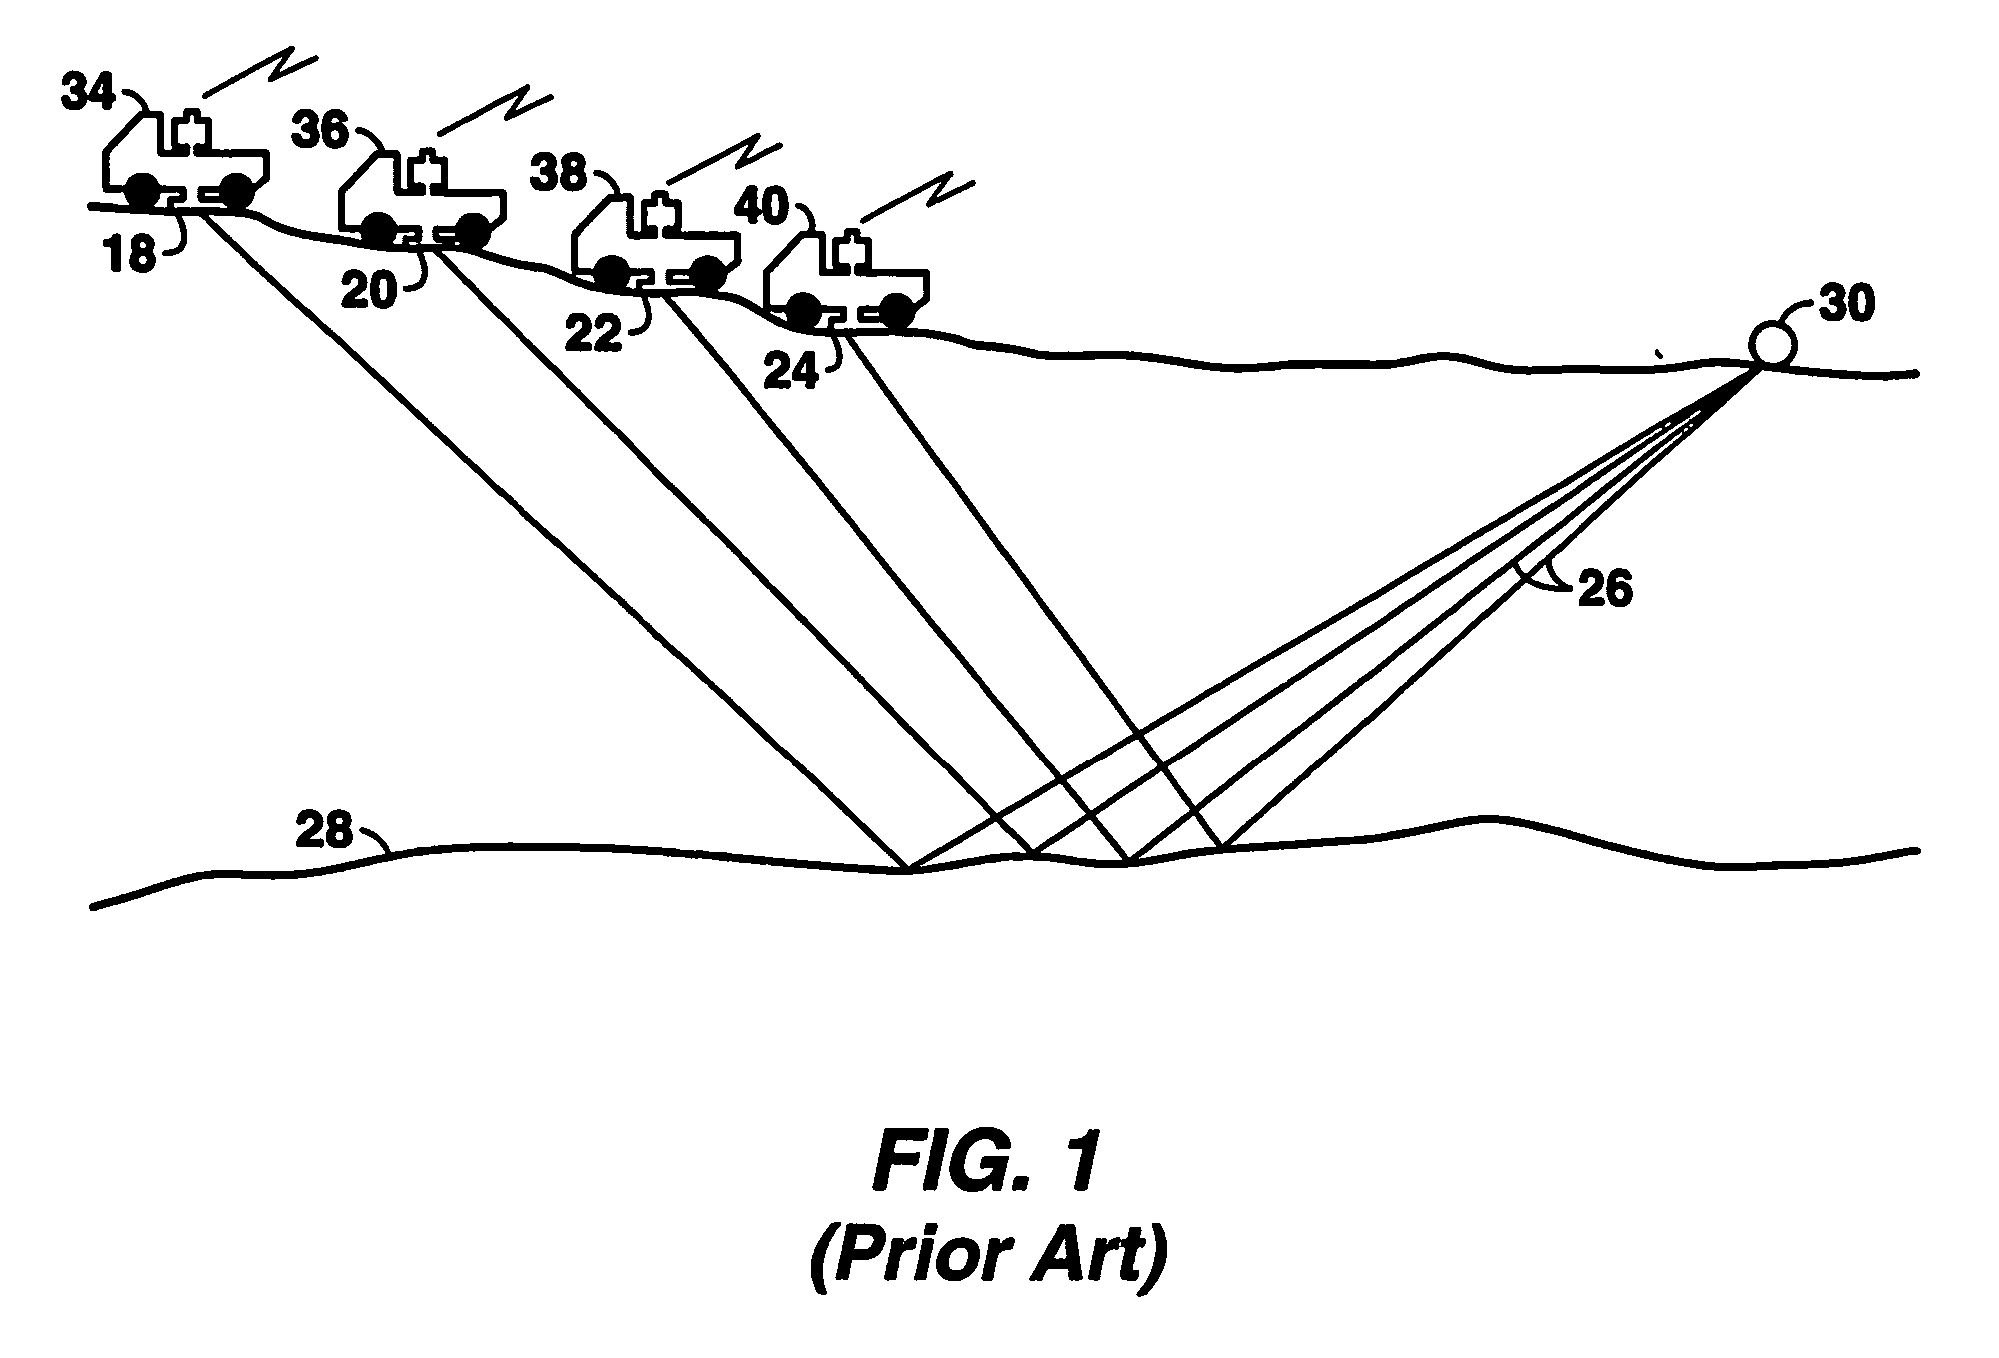 Method for continuous sweepting and separtion of multiple seismic vibrators